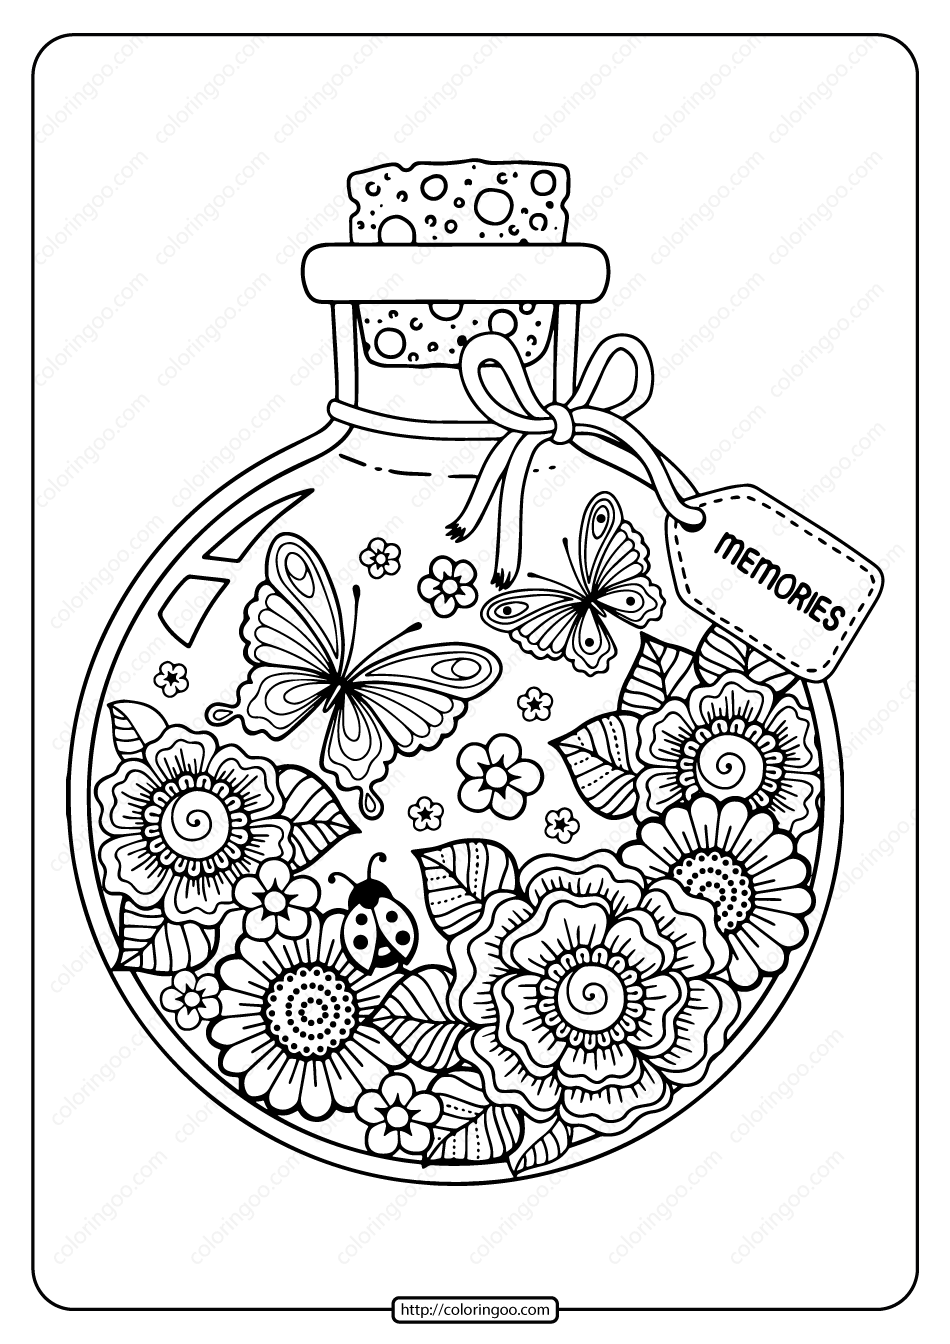 Printable Summer Memories Pdf Coloring Page | Coloring books, Coloring pages,  Bottle drawing